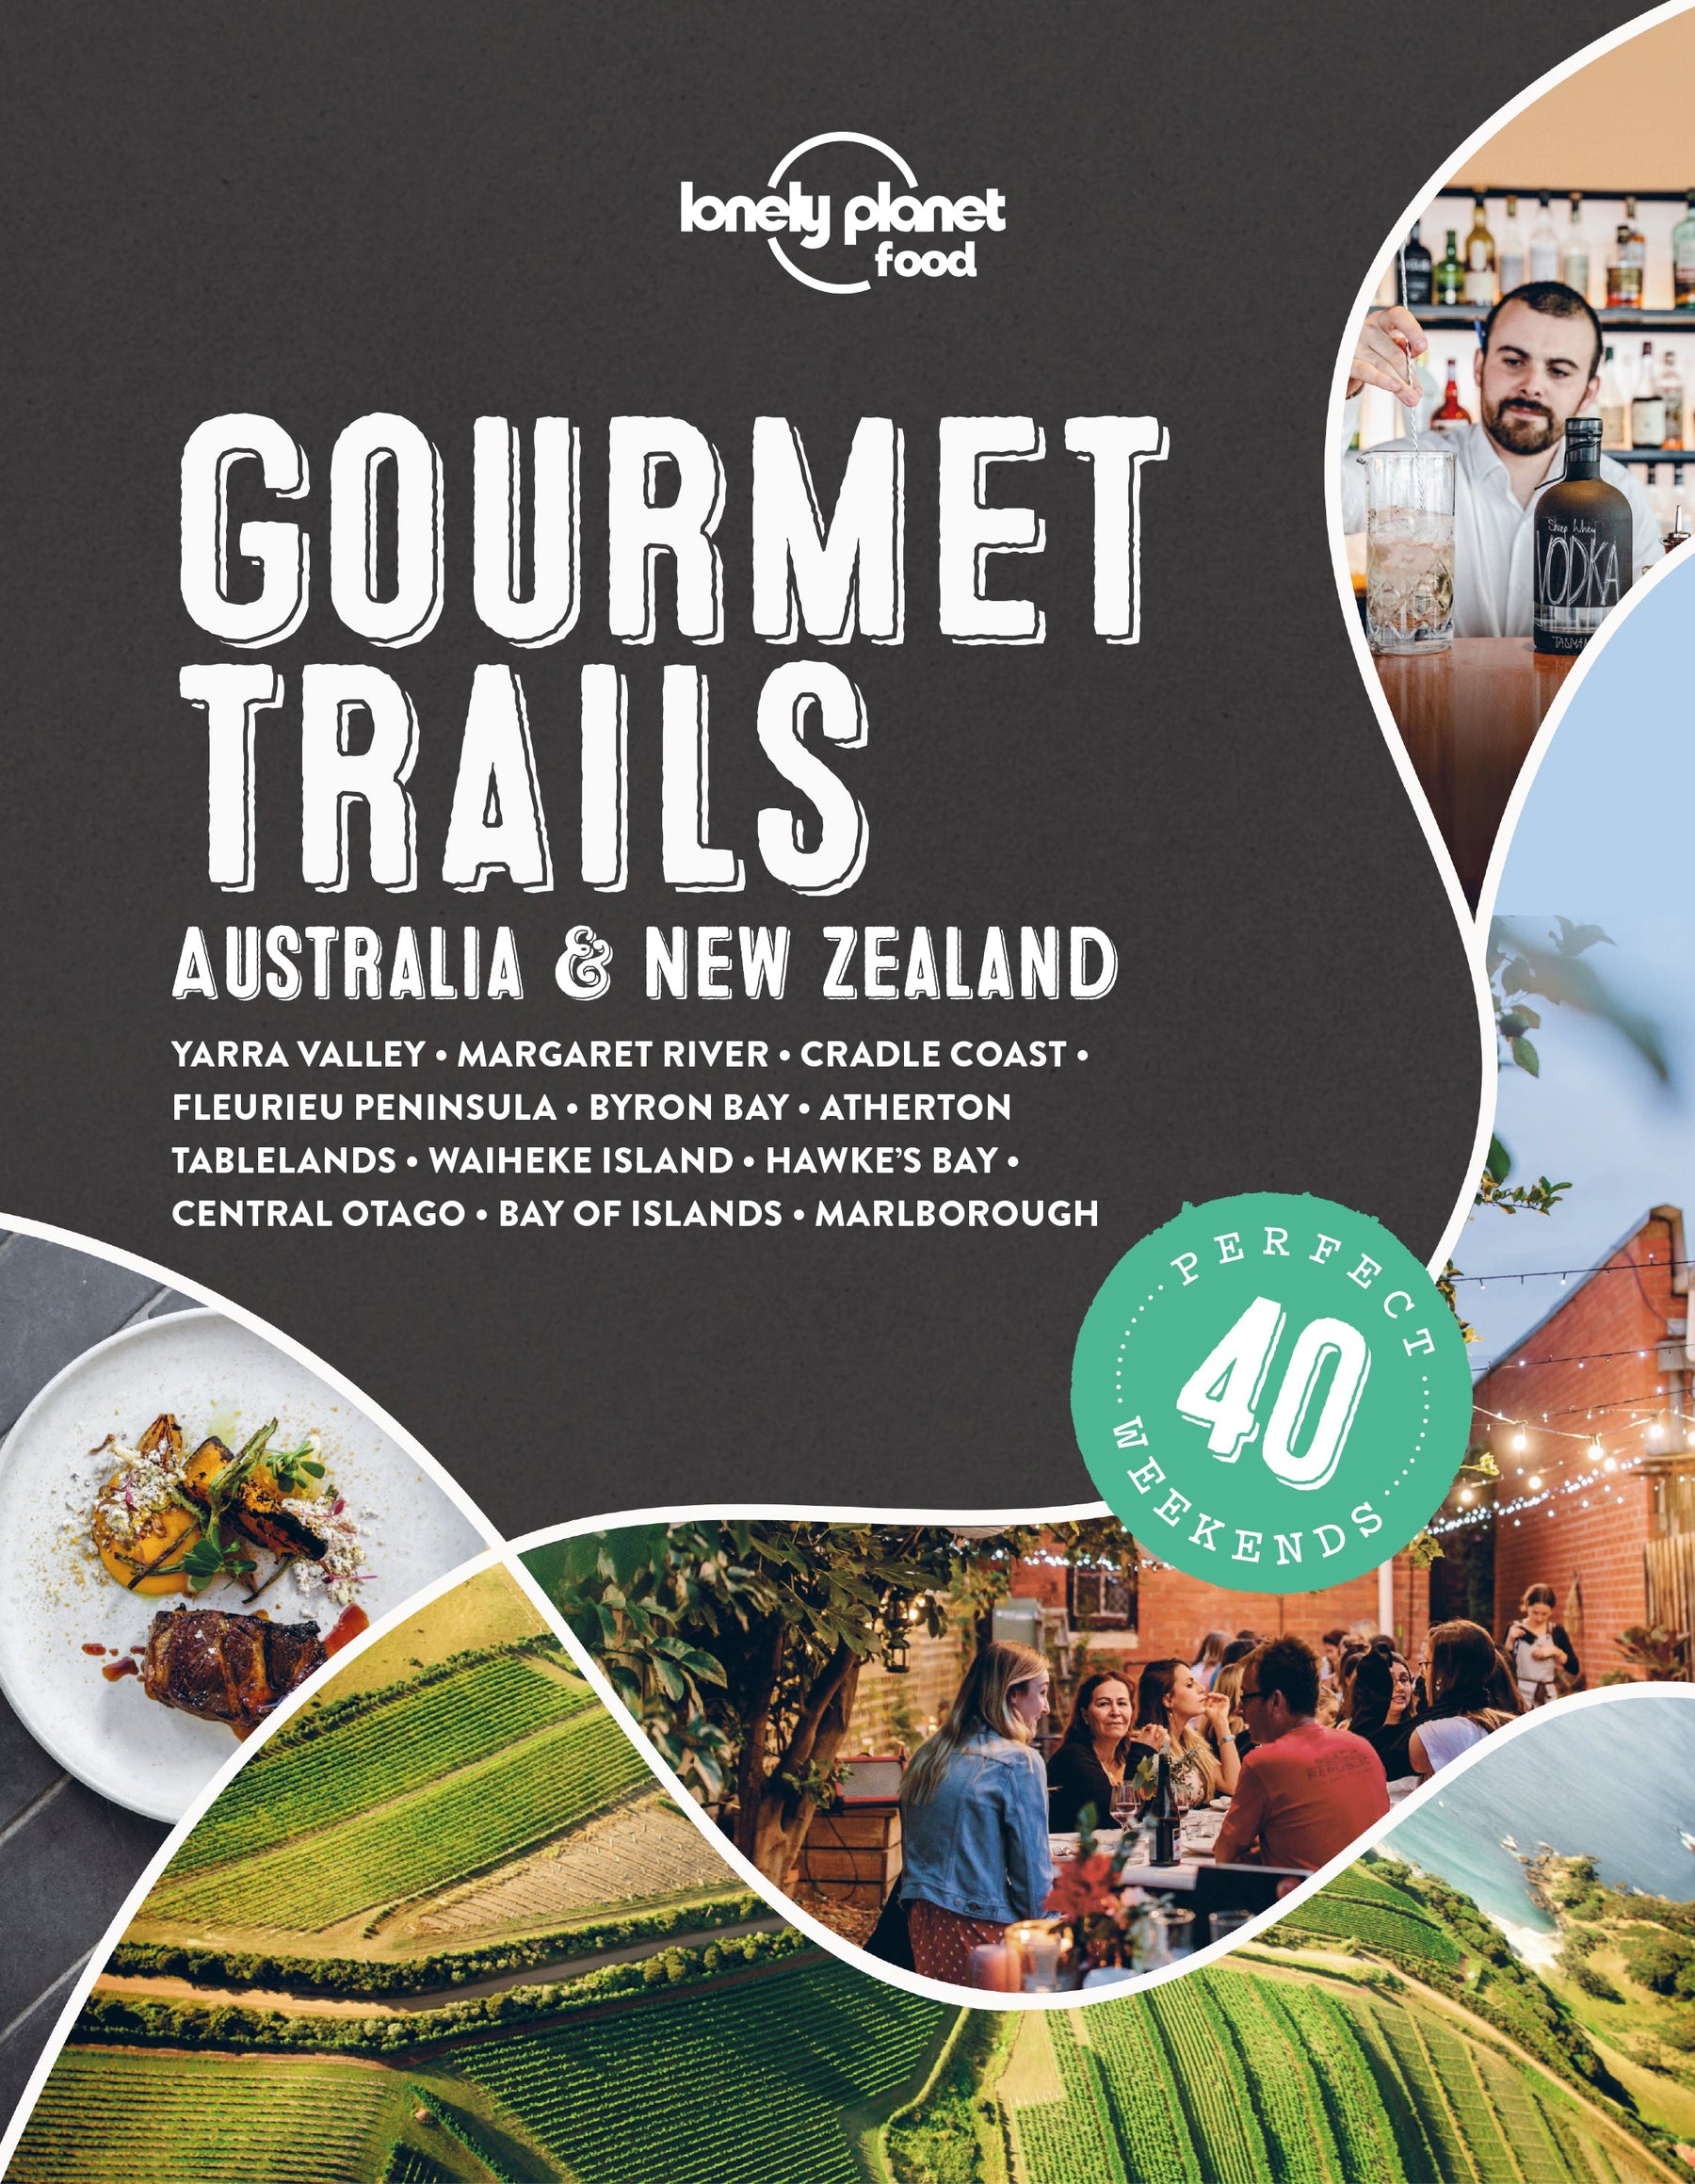 I. Introduction to Gourmet Food and Drink Experiences